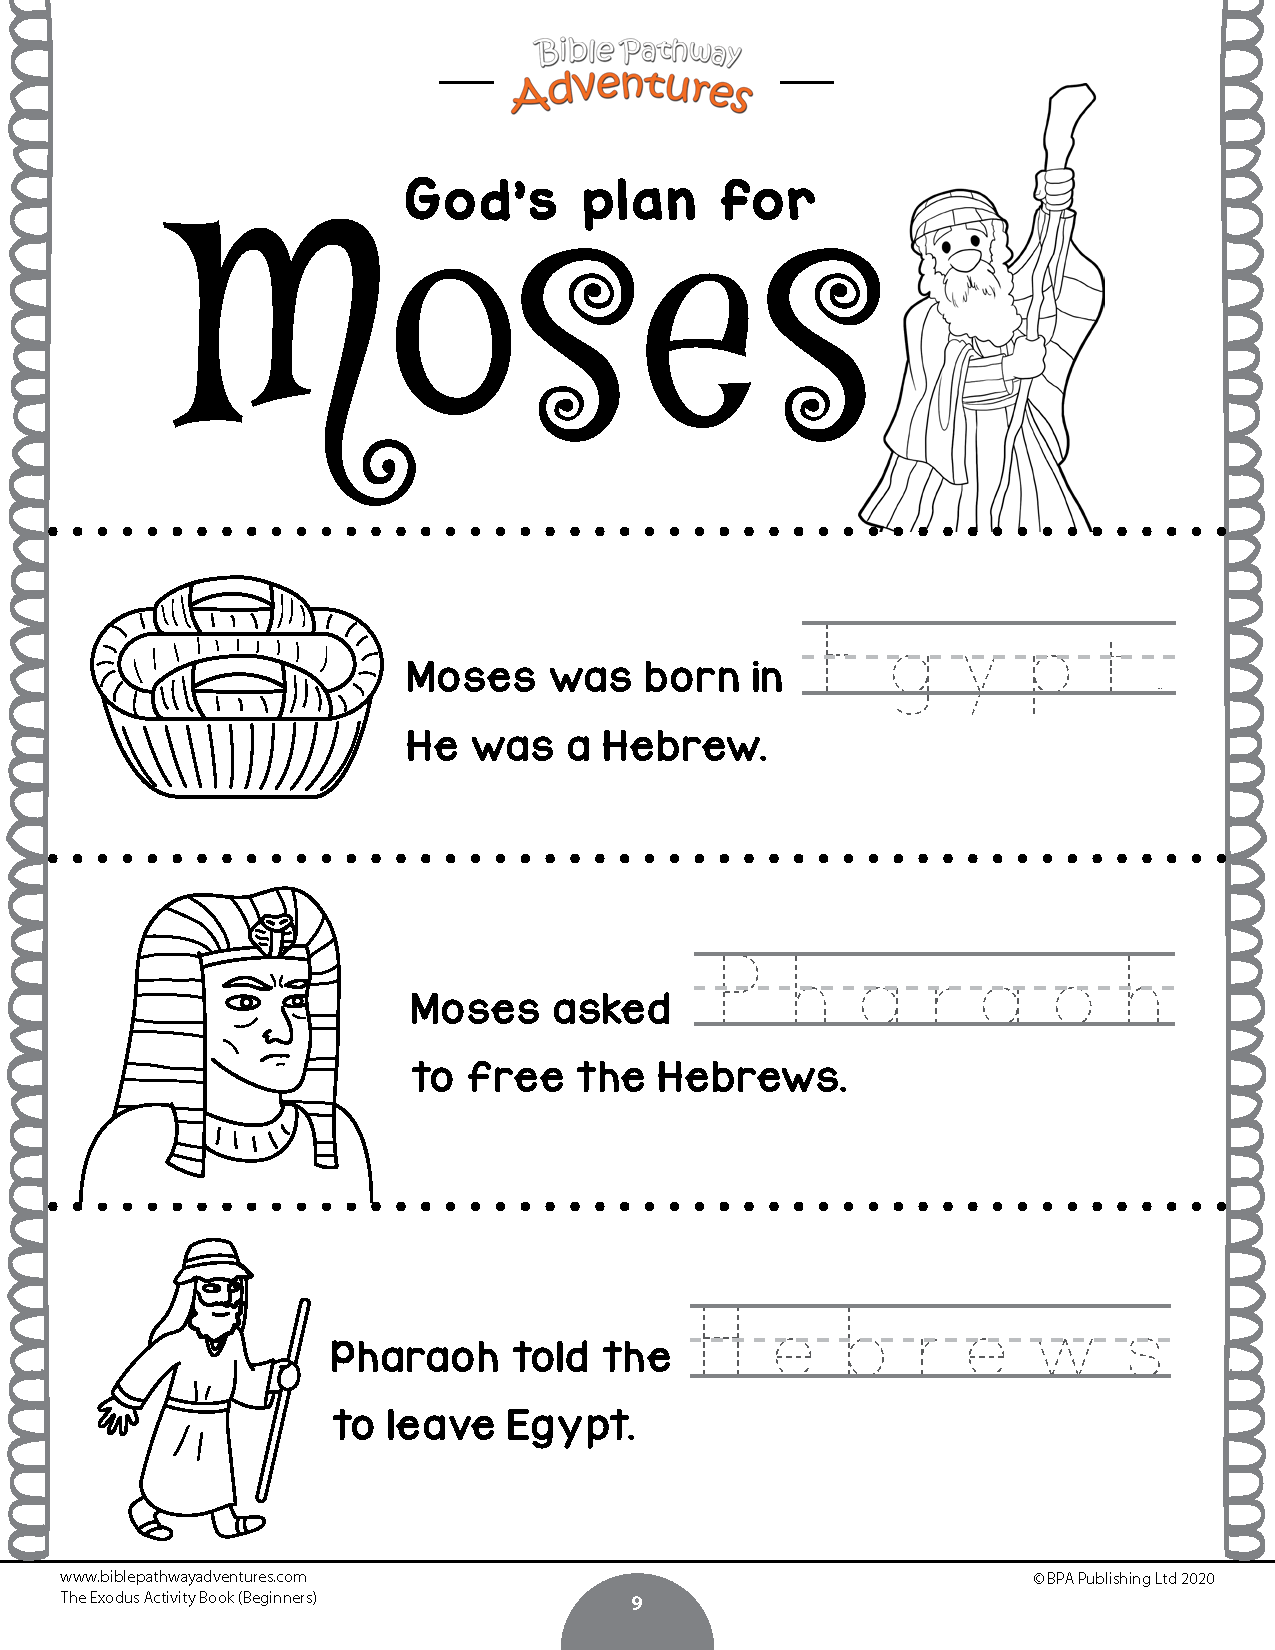 The Exodus Activity Book for Beginners